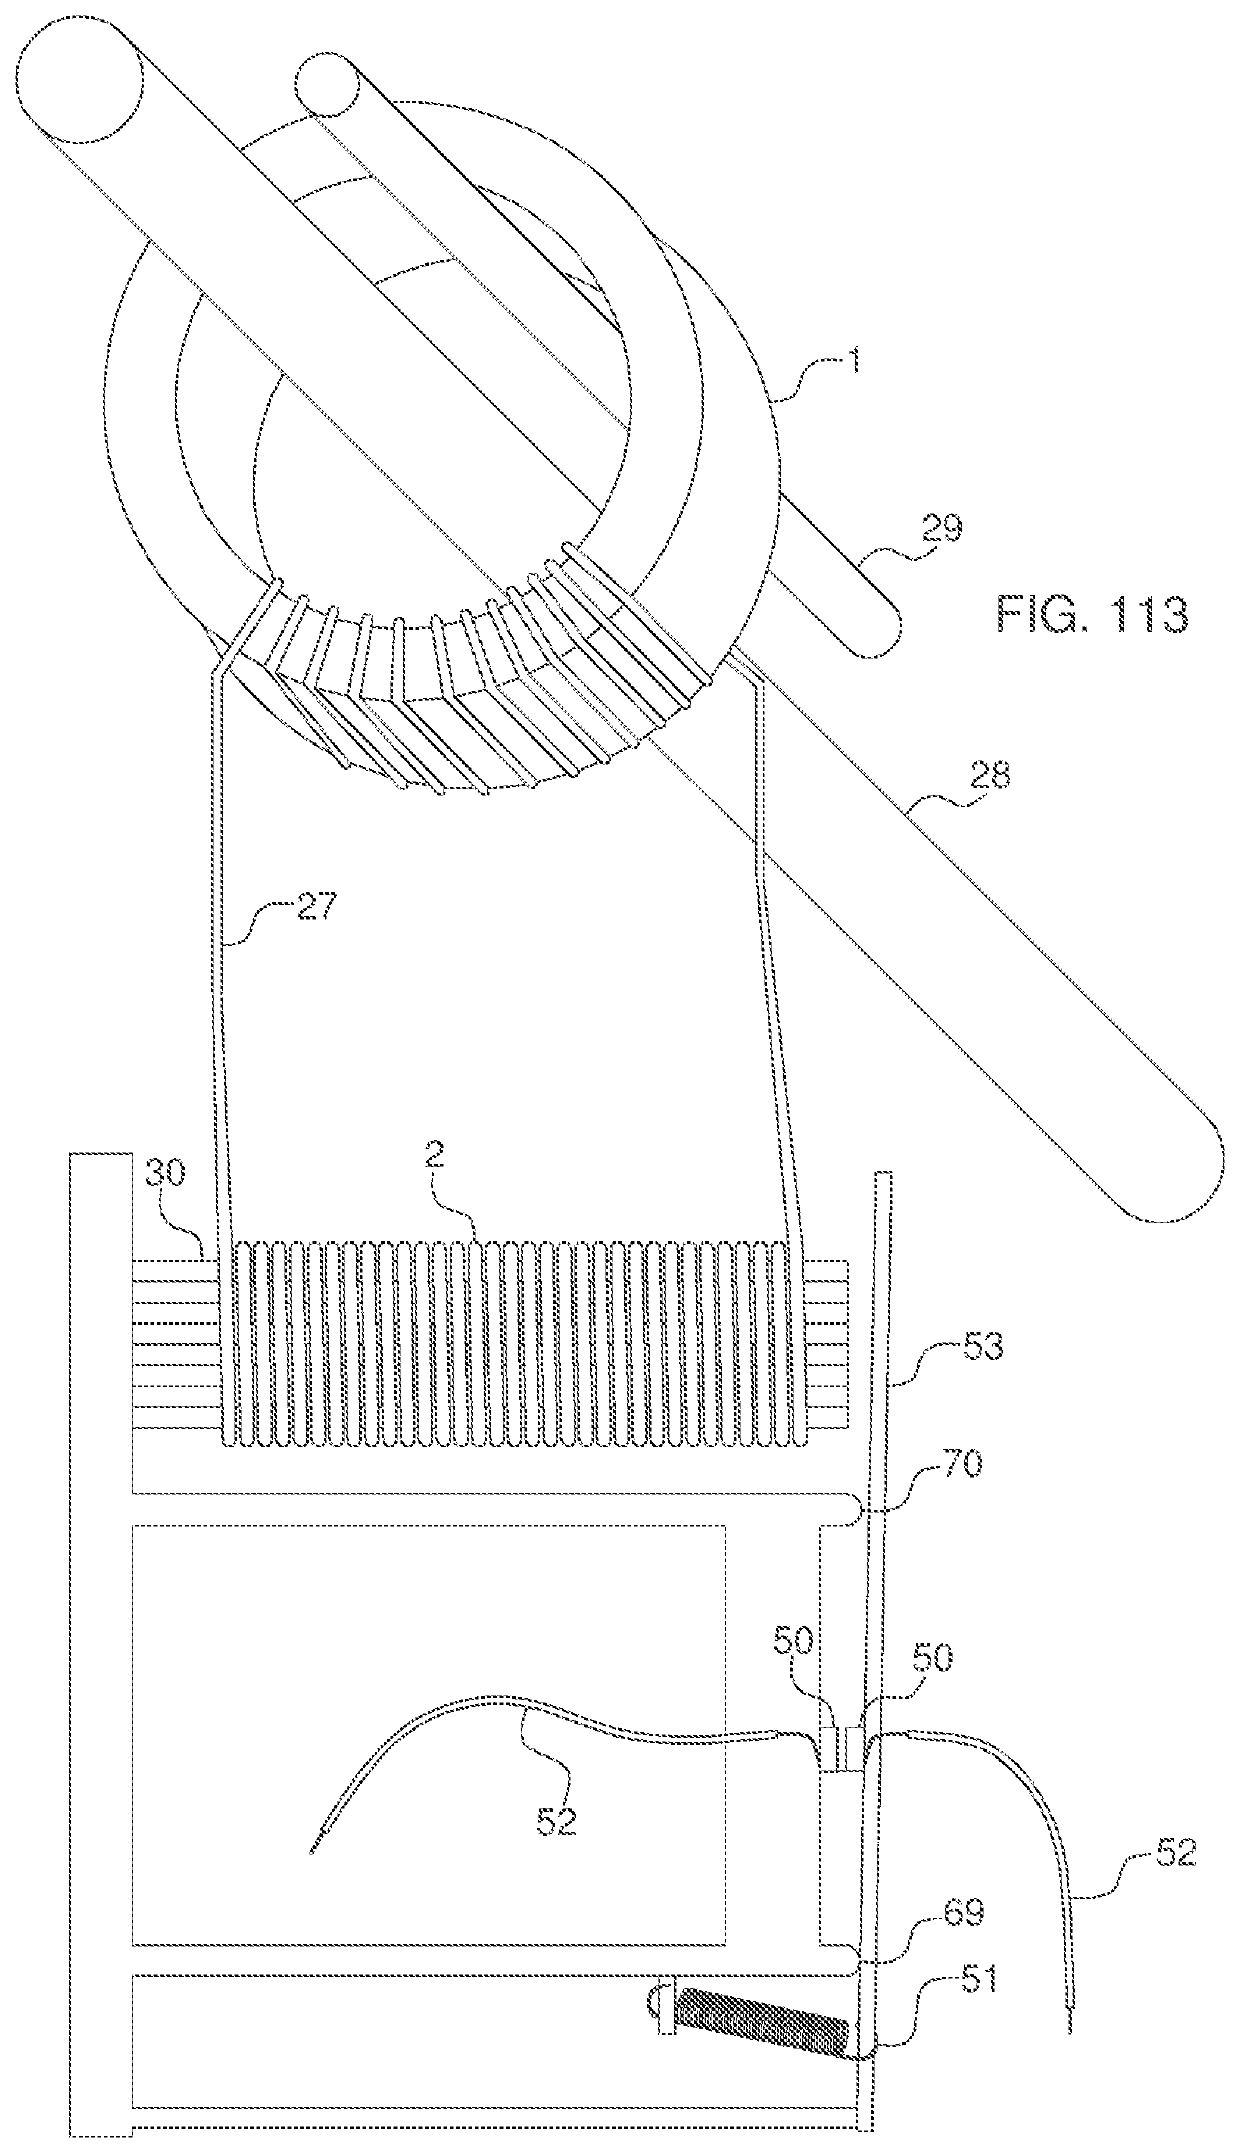 Alternative energy interface, with power control system, multiple source combiner, and islanding